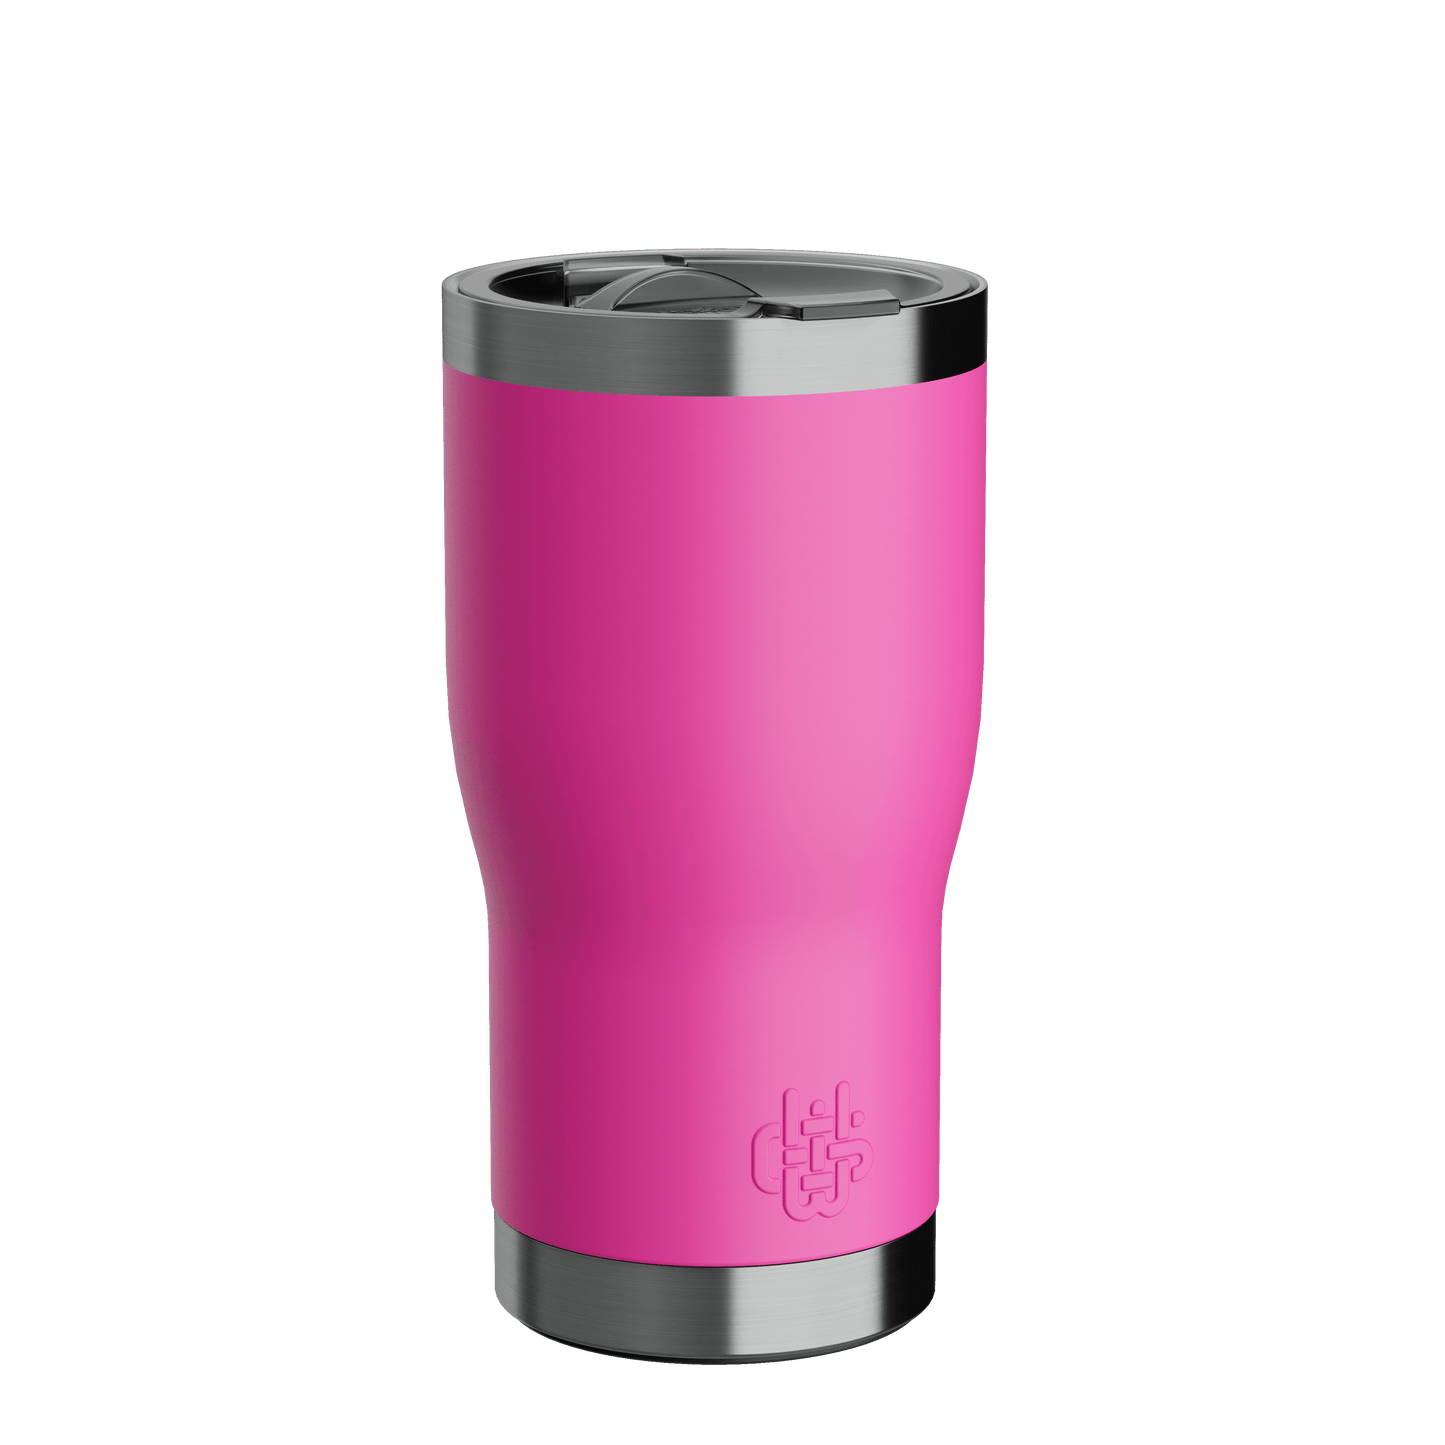 Wyld Gear 20oz Tumbler - Multiple Colors - Perfect Etch